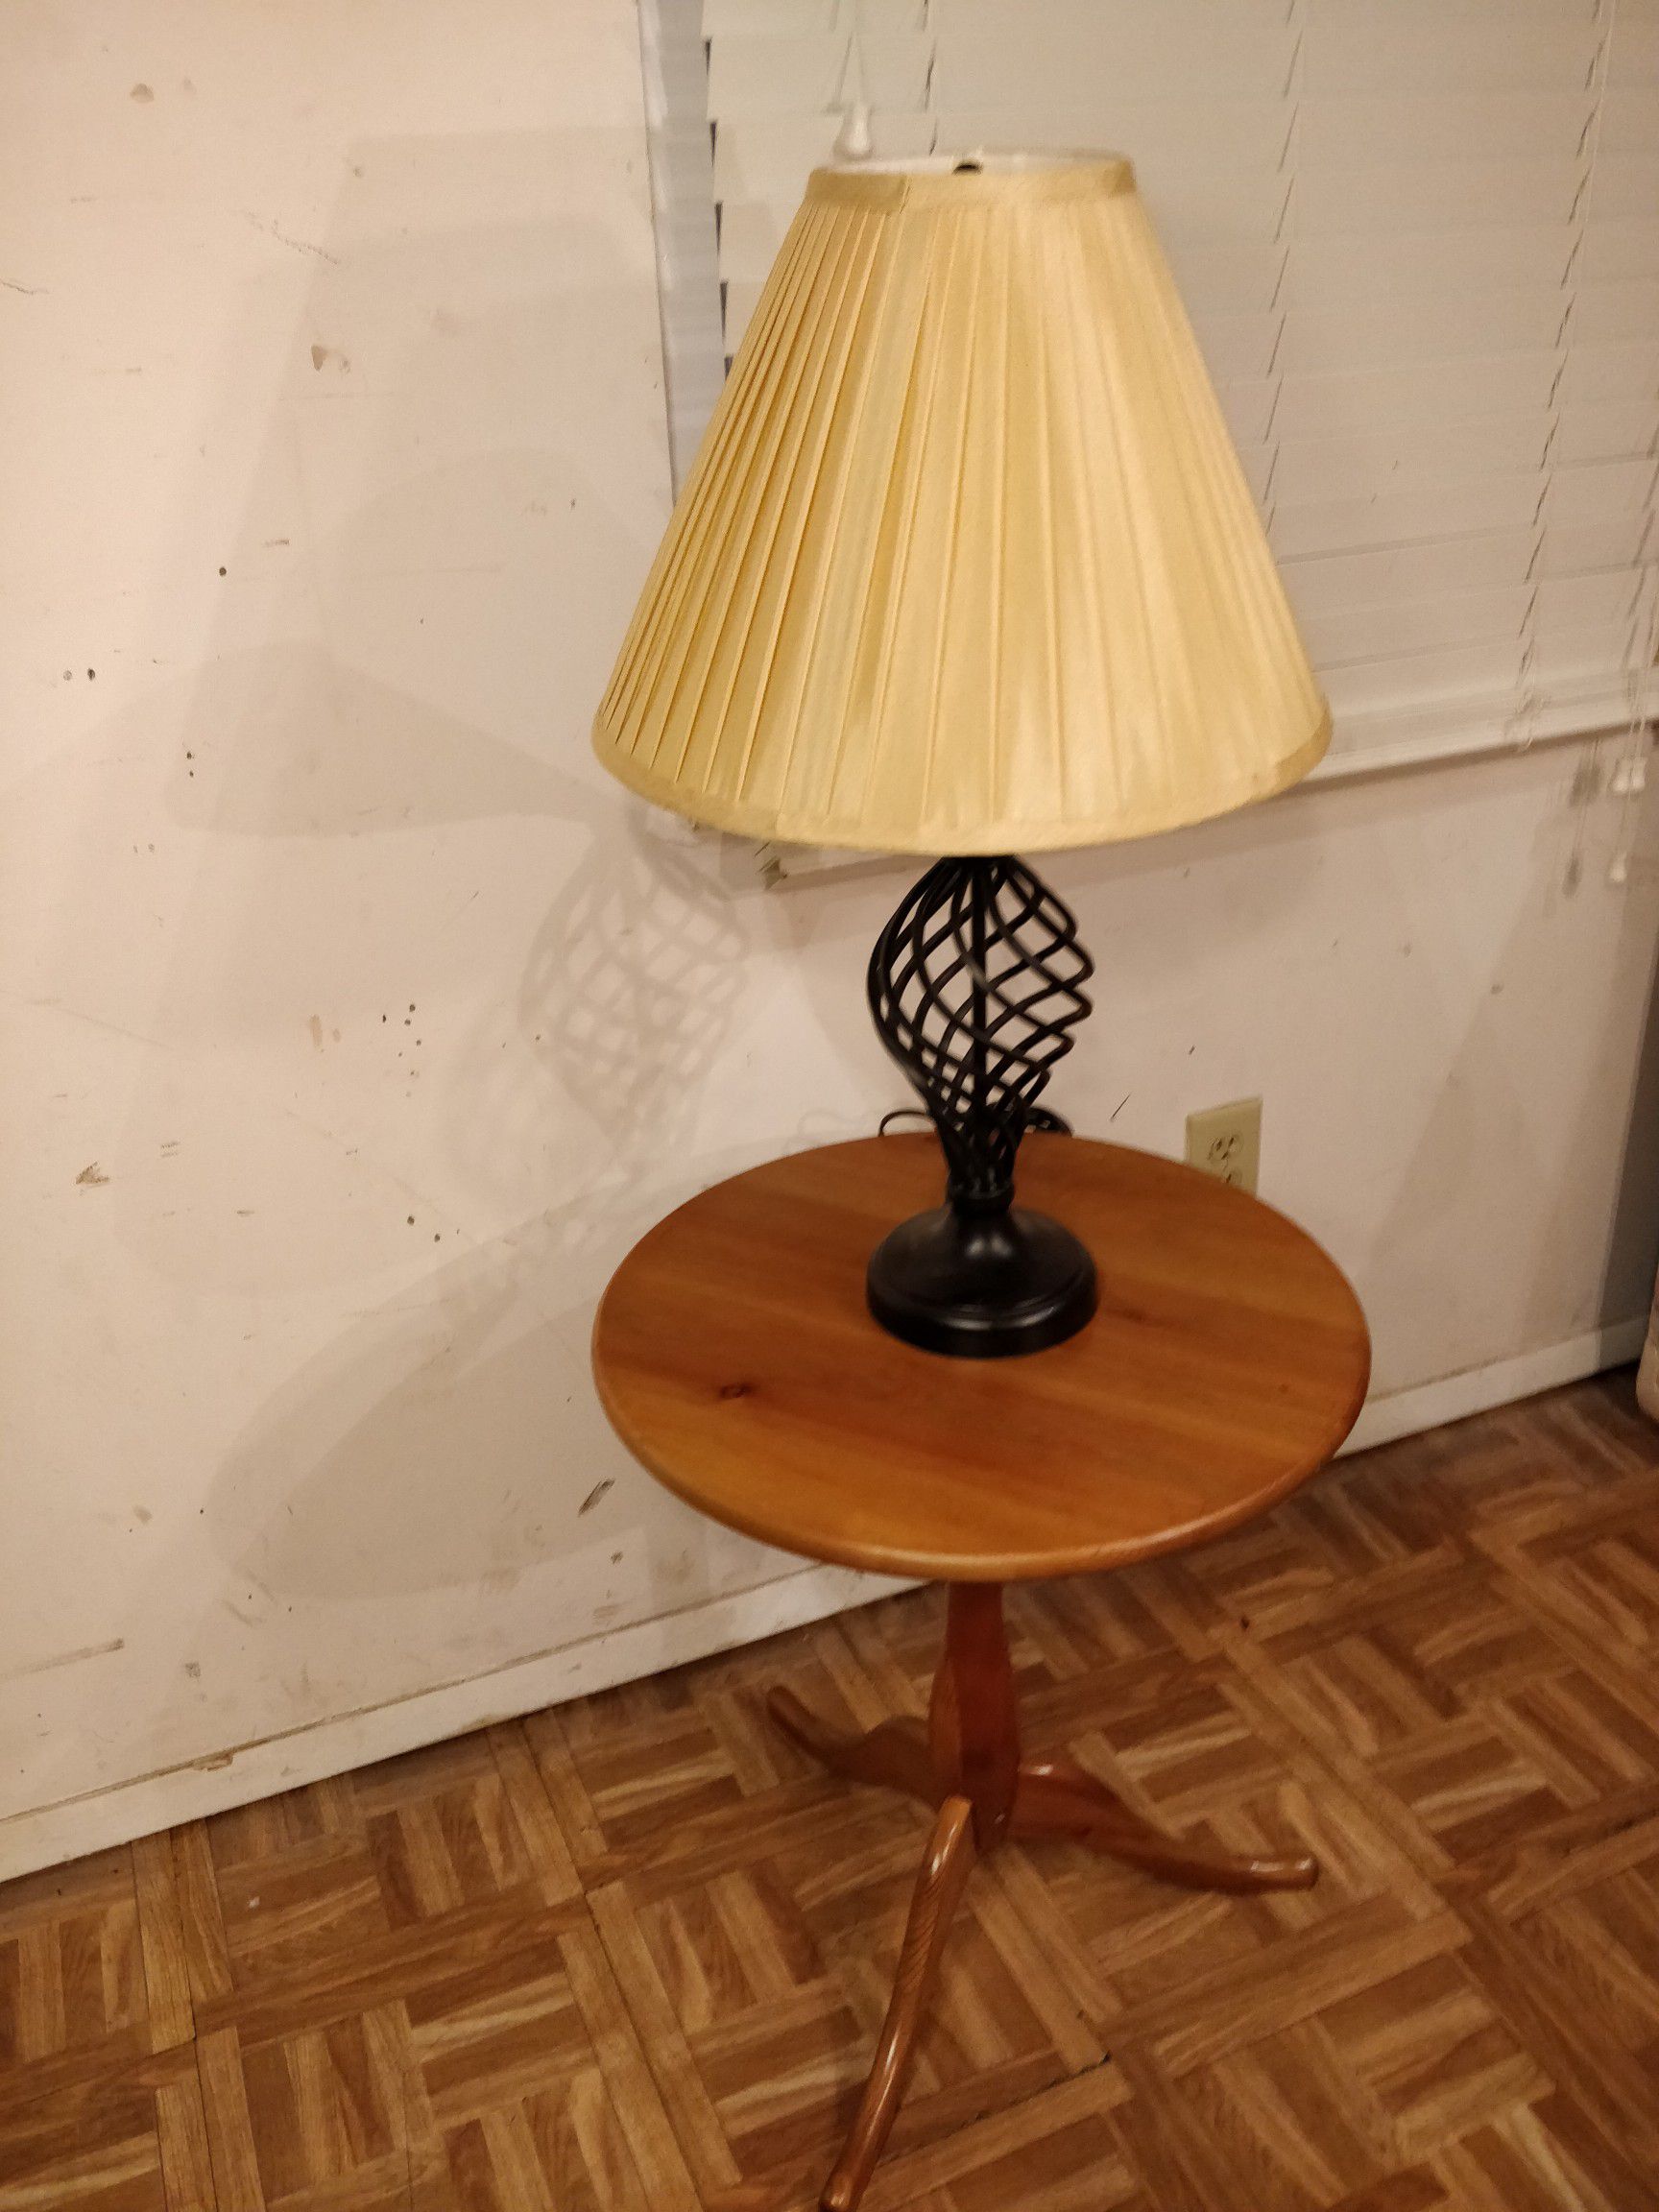 Nice solid wood table with lamp in great condition